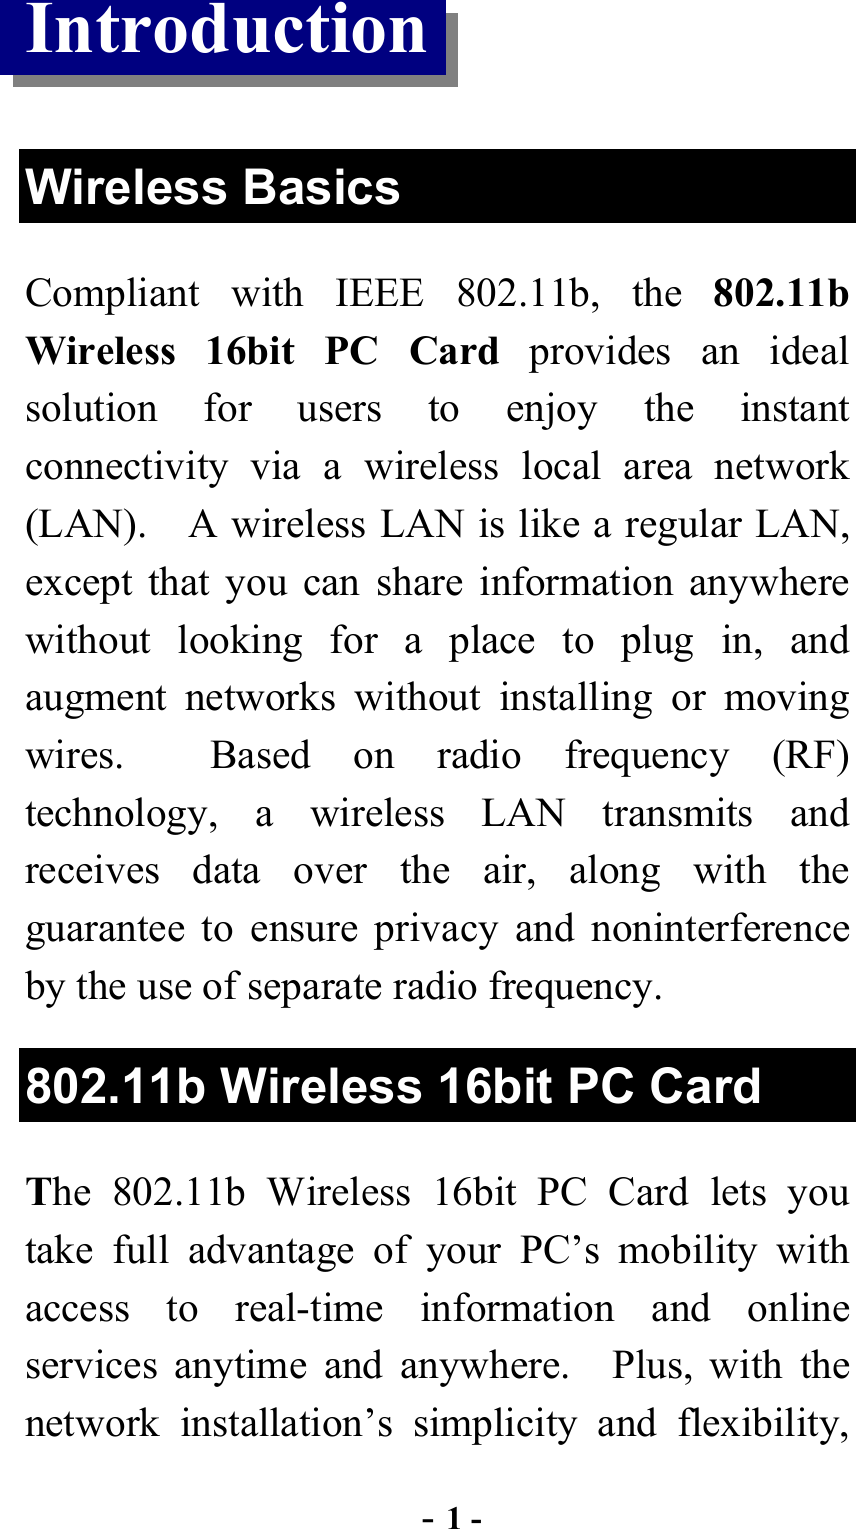  - 1 - Introduction  Wireless Basics Compliant with IEEE 802.11b, the 802.11b Wireless 16bit PC Card provides an ideal solution for users to enjoy the instant connectivity via a wireless local area network (LAN).    A wireless LAN is like a regular LAN, except that you can share information anywhere without looking for a place to plug in, and augment networks without installing or moving wires.  Based on radio frequency (RF) technology, a wireless LAN transmits and receives data over the air, along with the guarantee to ensure privacy and noninterference by the use of separate radio frequency. 802.11b Wireless 16bit PC Card The 802.11b Wireless 16bit PC Card lets you take full advantage of your PC’s mobility with access to real-time information and online services anytime and anywhere.  Plus, with the network installation’s simplicity and flexibility, 